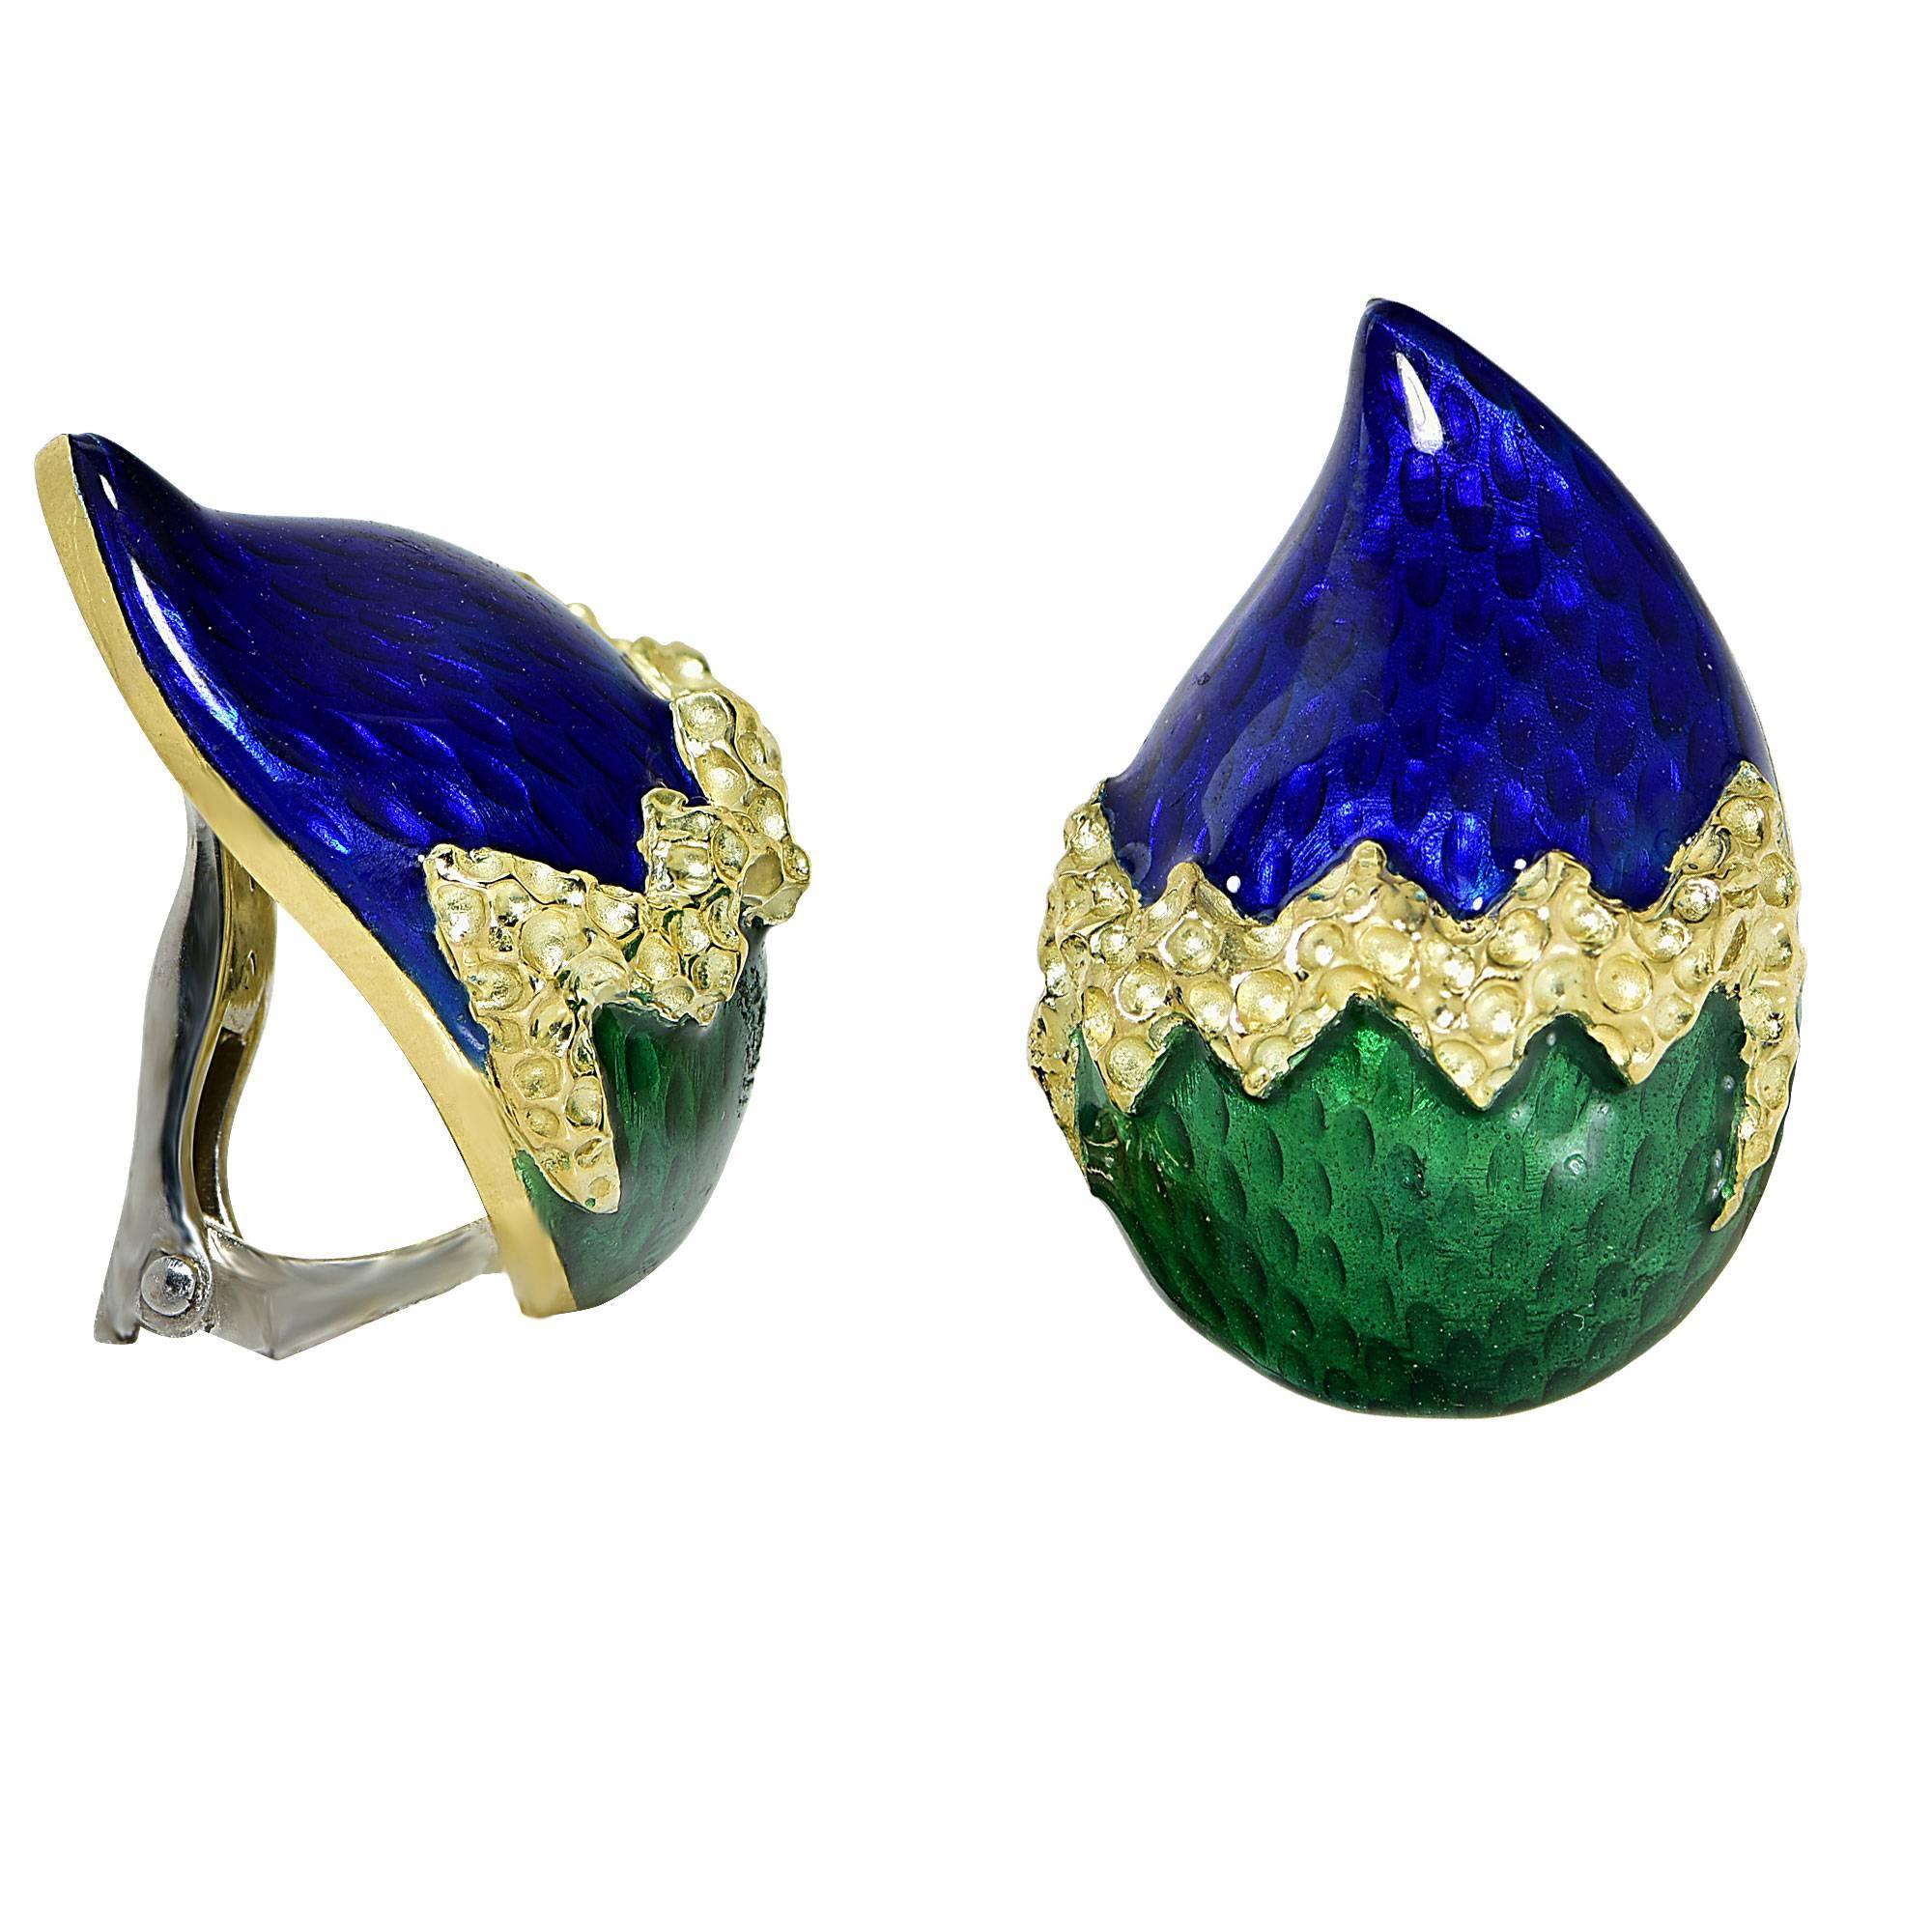 Large 18k yellow gold vibrant blue and green enamel earrings.

Weight: 21.45 grams

This diamond ring is accompanied by a retail appraisal performed by a Graduate Gemologist.